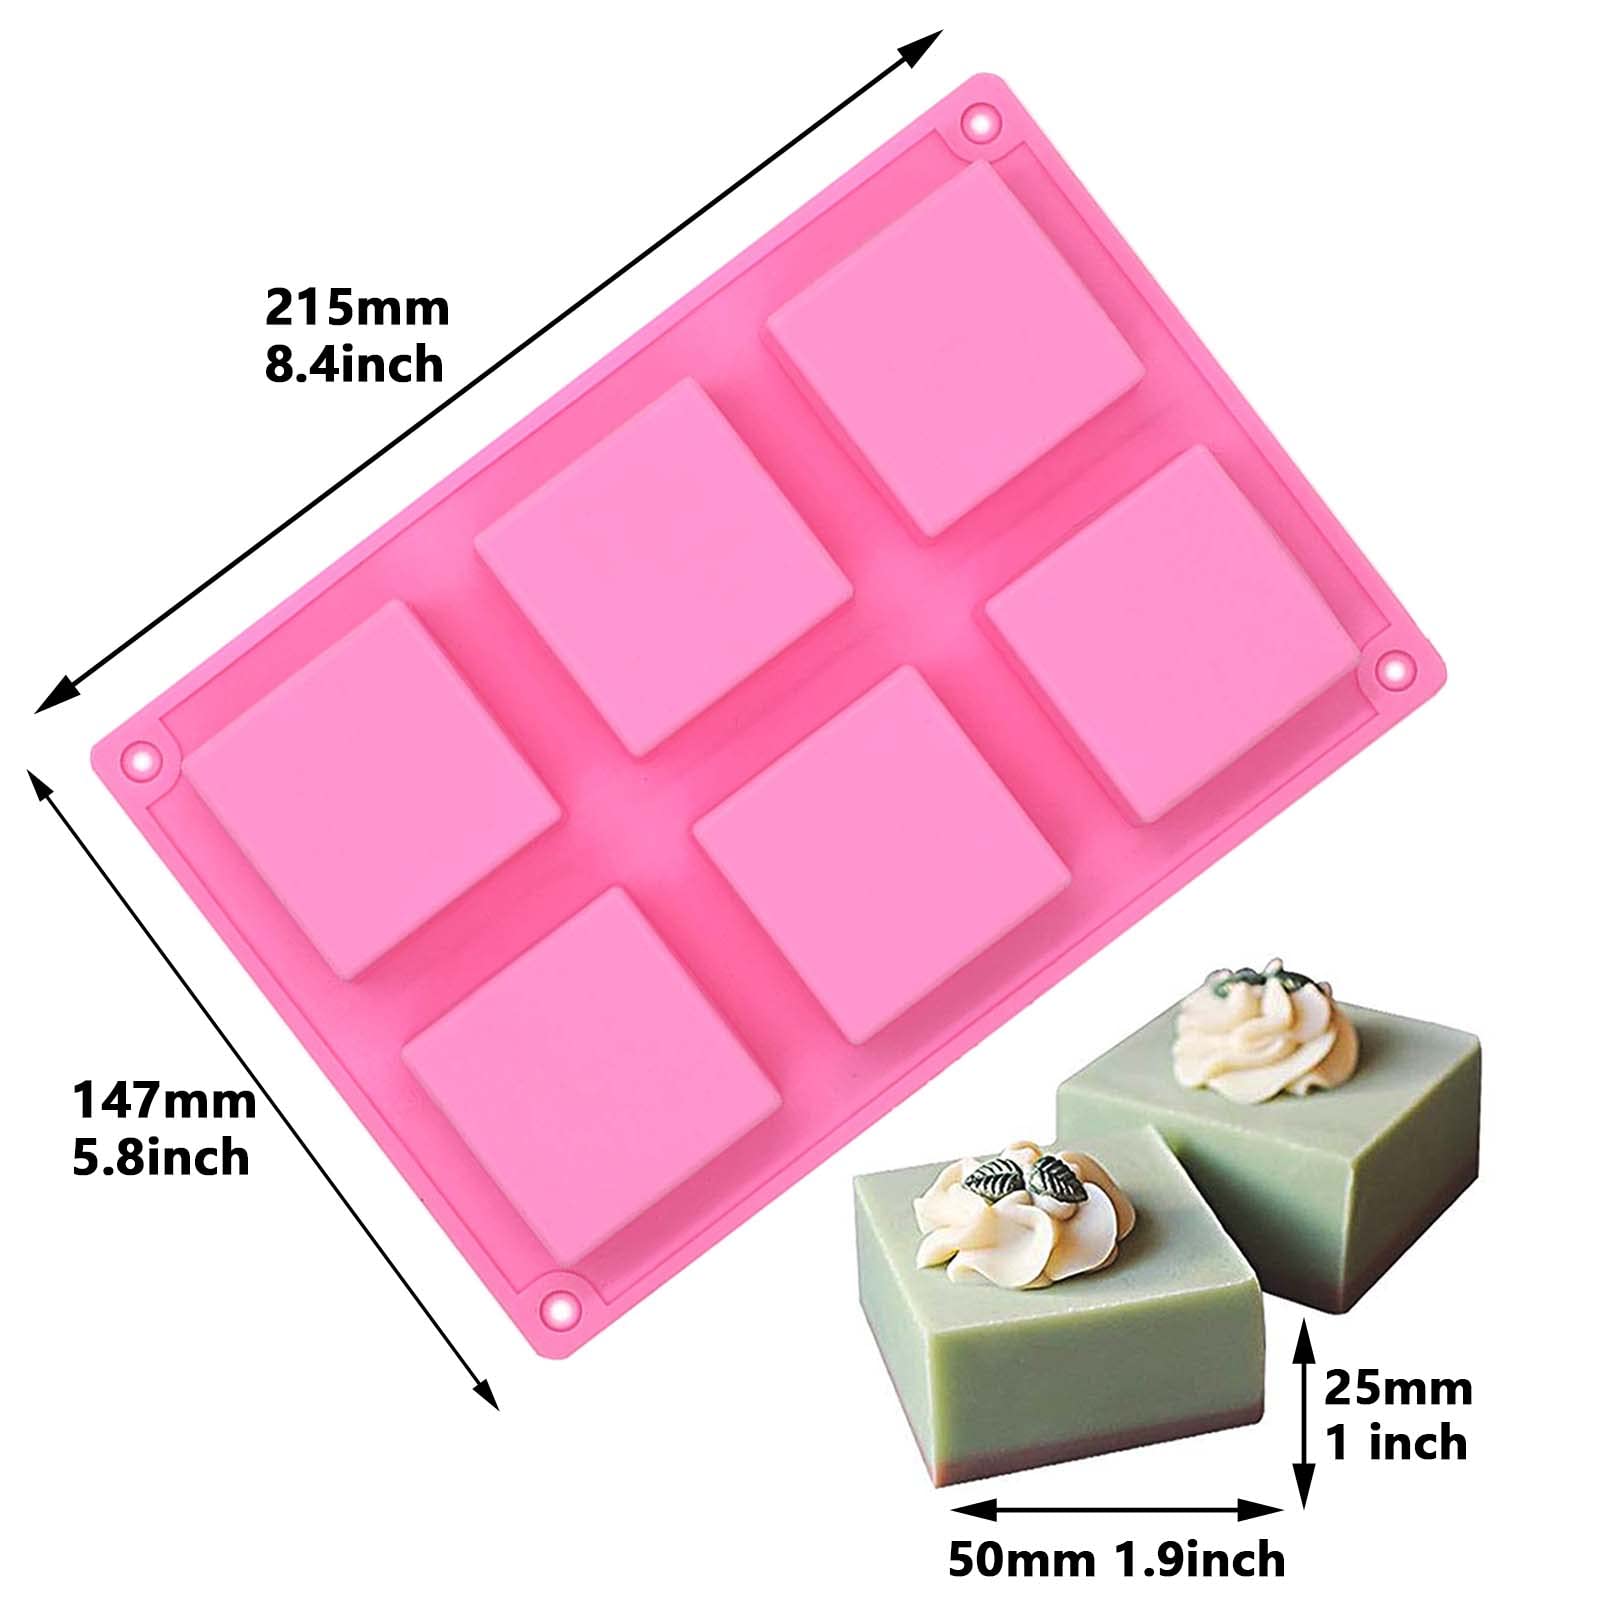 Funshowcase 6-Cavity Square Baking Silicone Mold for Cake Teacake Chocolate Desserts Cheesecake Cornbread Brownie Blancmange Pudding Soap Candle Making Resin Epoxy Casting Crafting Projects 3-in-set